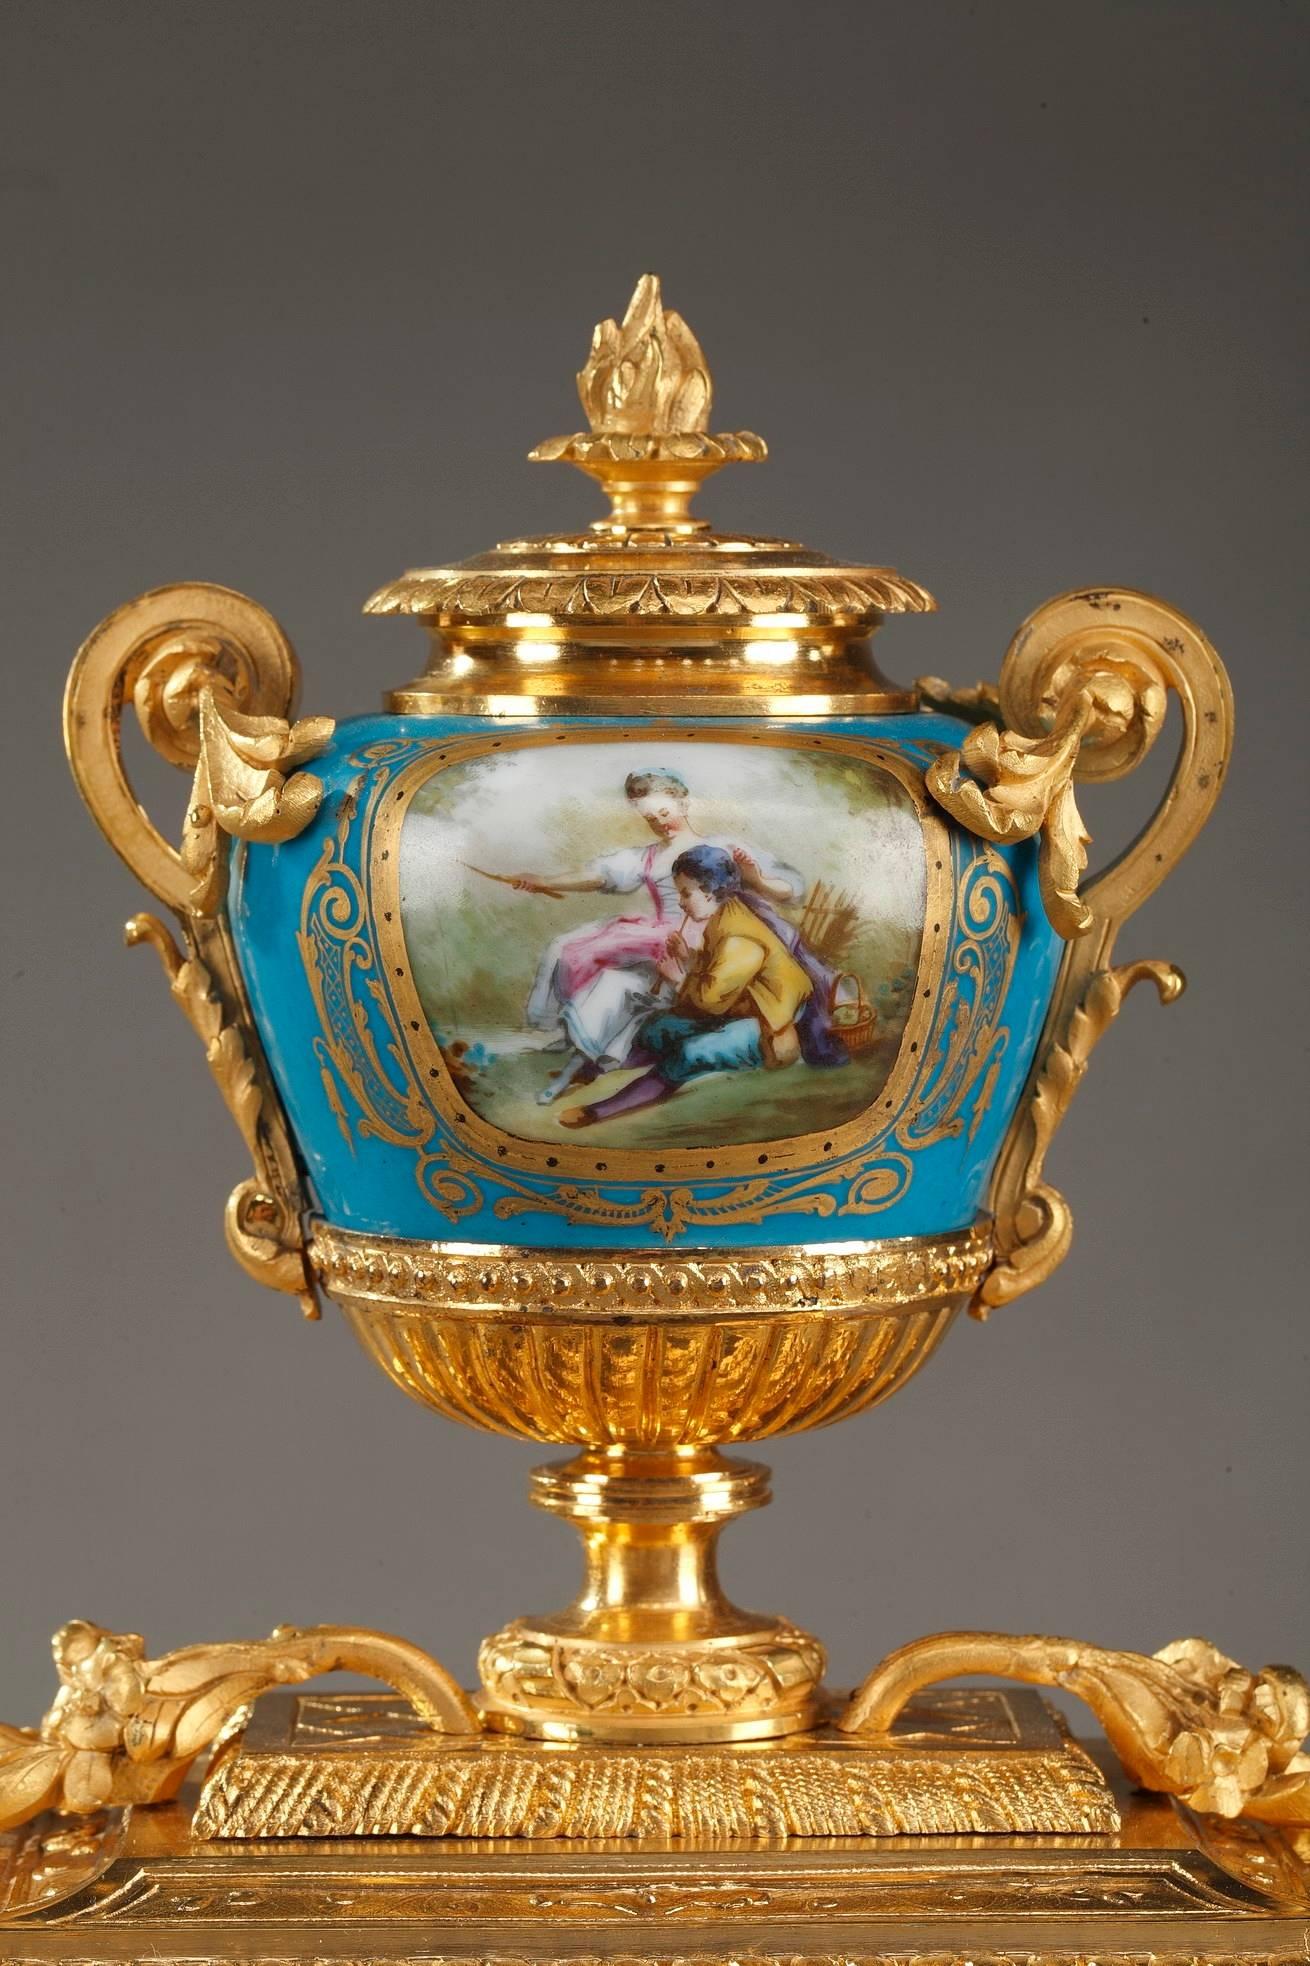 Gilt bronze antique table clock decorated with polychromatic porcelain panels. Telling the hour on Roman numerals, the timepiece features a blue and white enamel dial, painted with a gallant scene in 18th century taste. The sides are decorated with